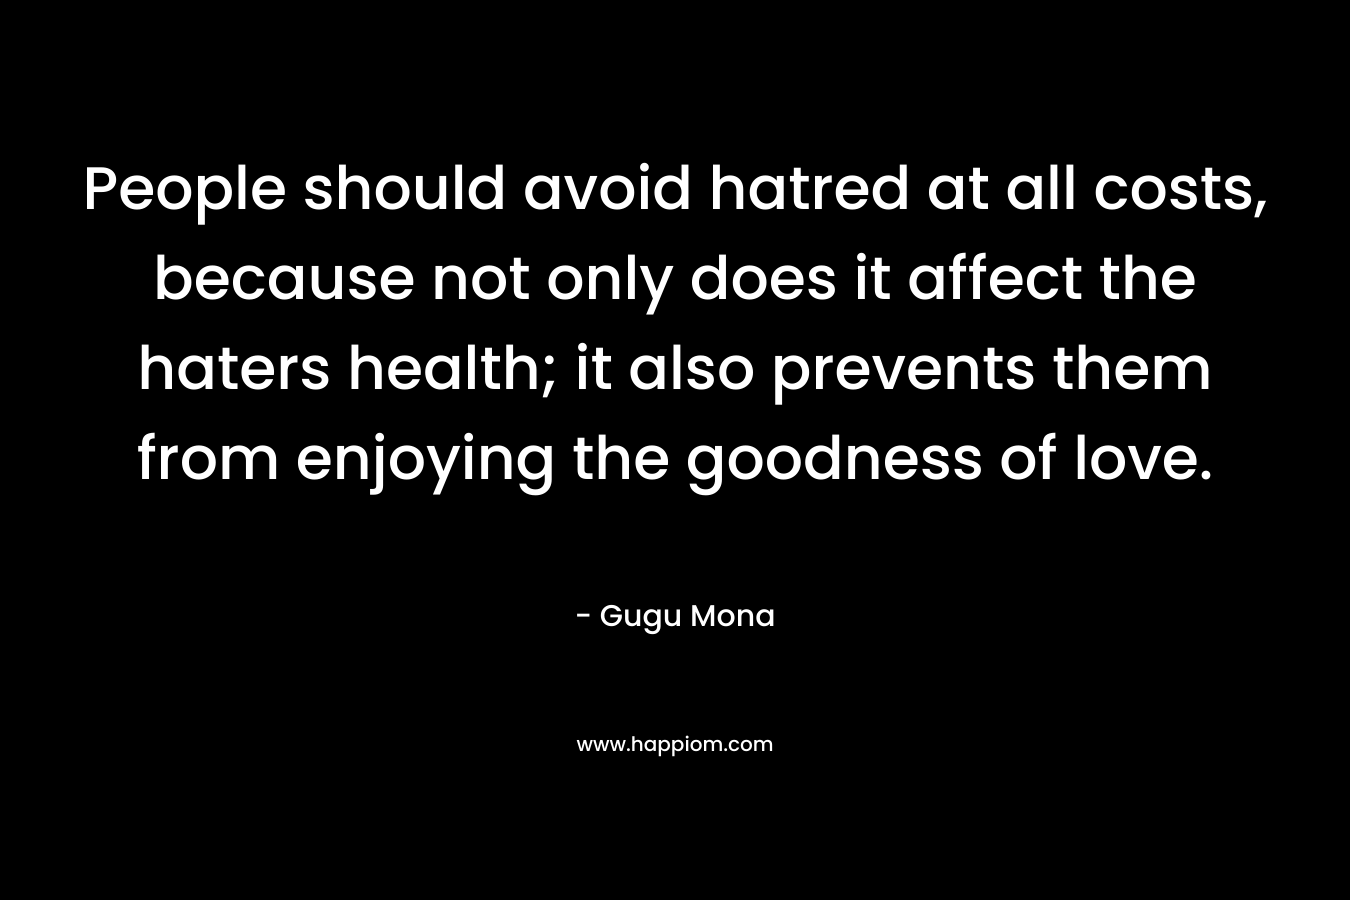 People should avoid hatred at all costs, because not only does it affect the haters health; it also prevents them from enjoying the goodness of love.